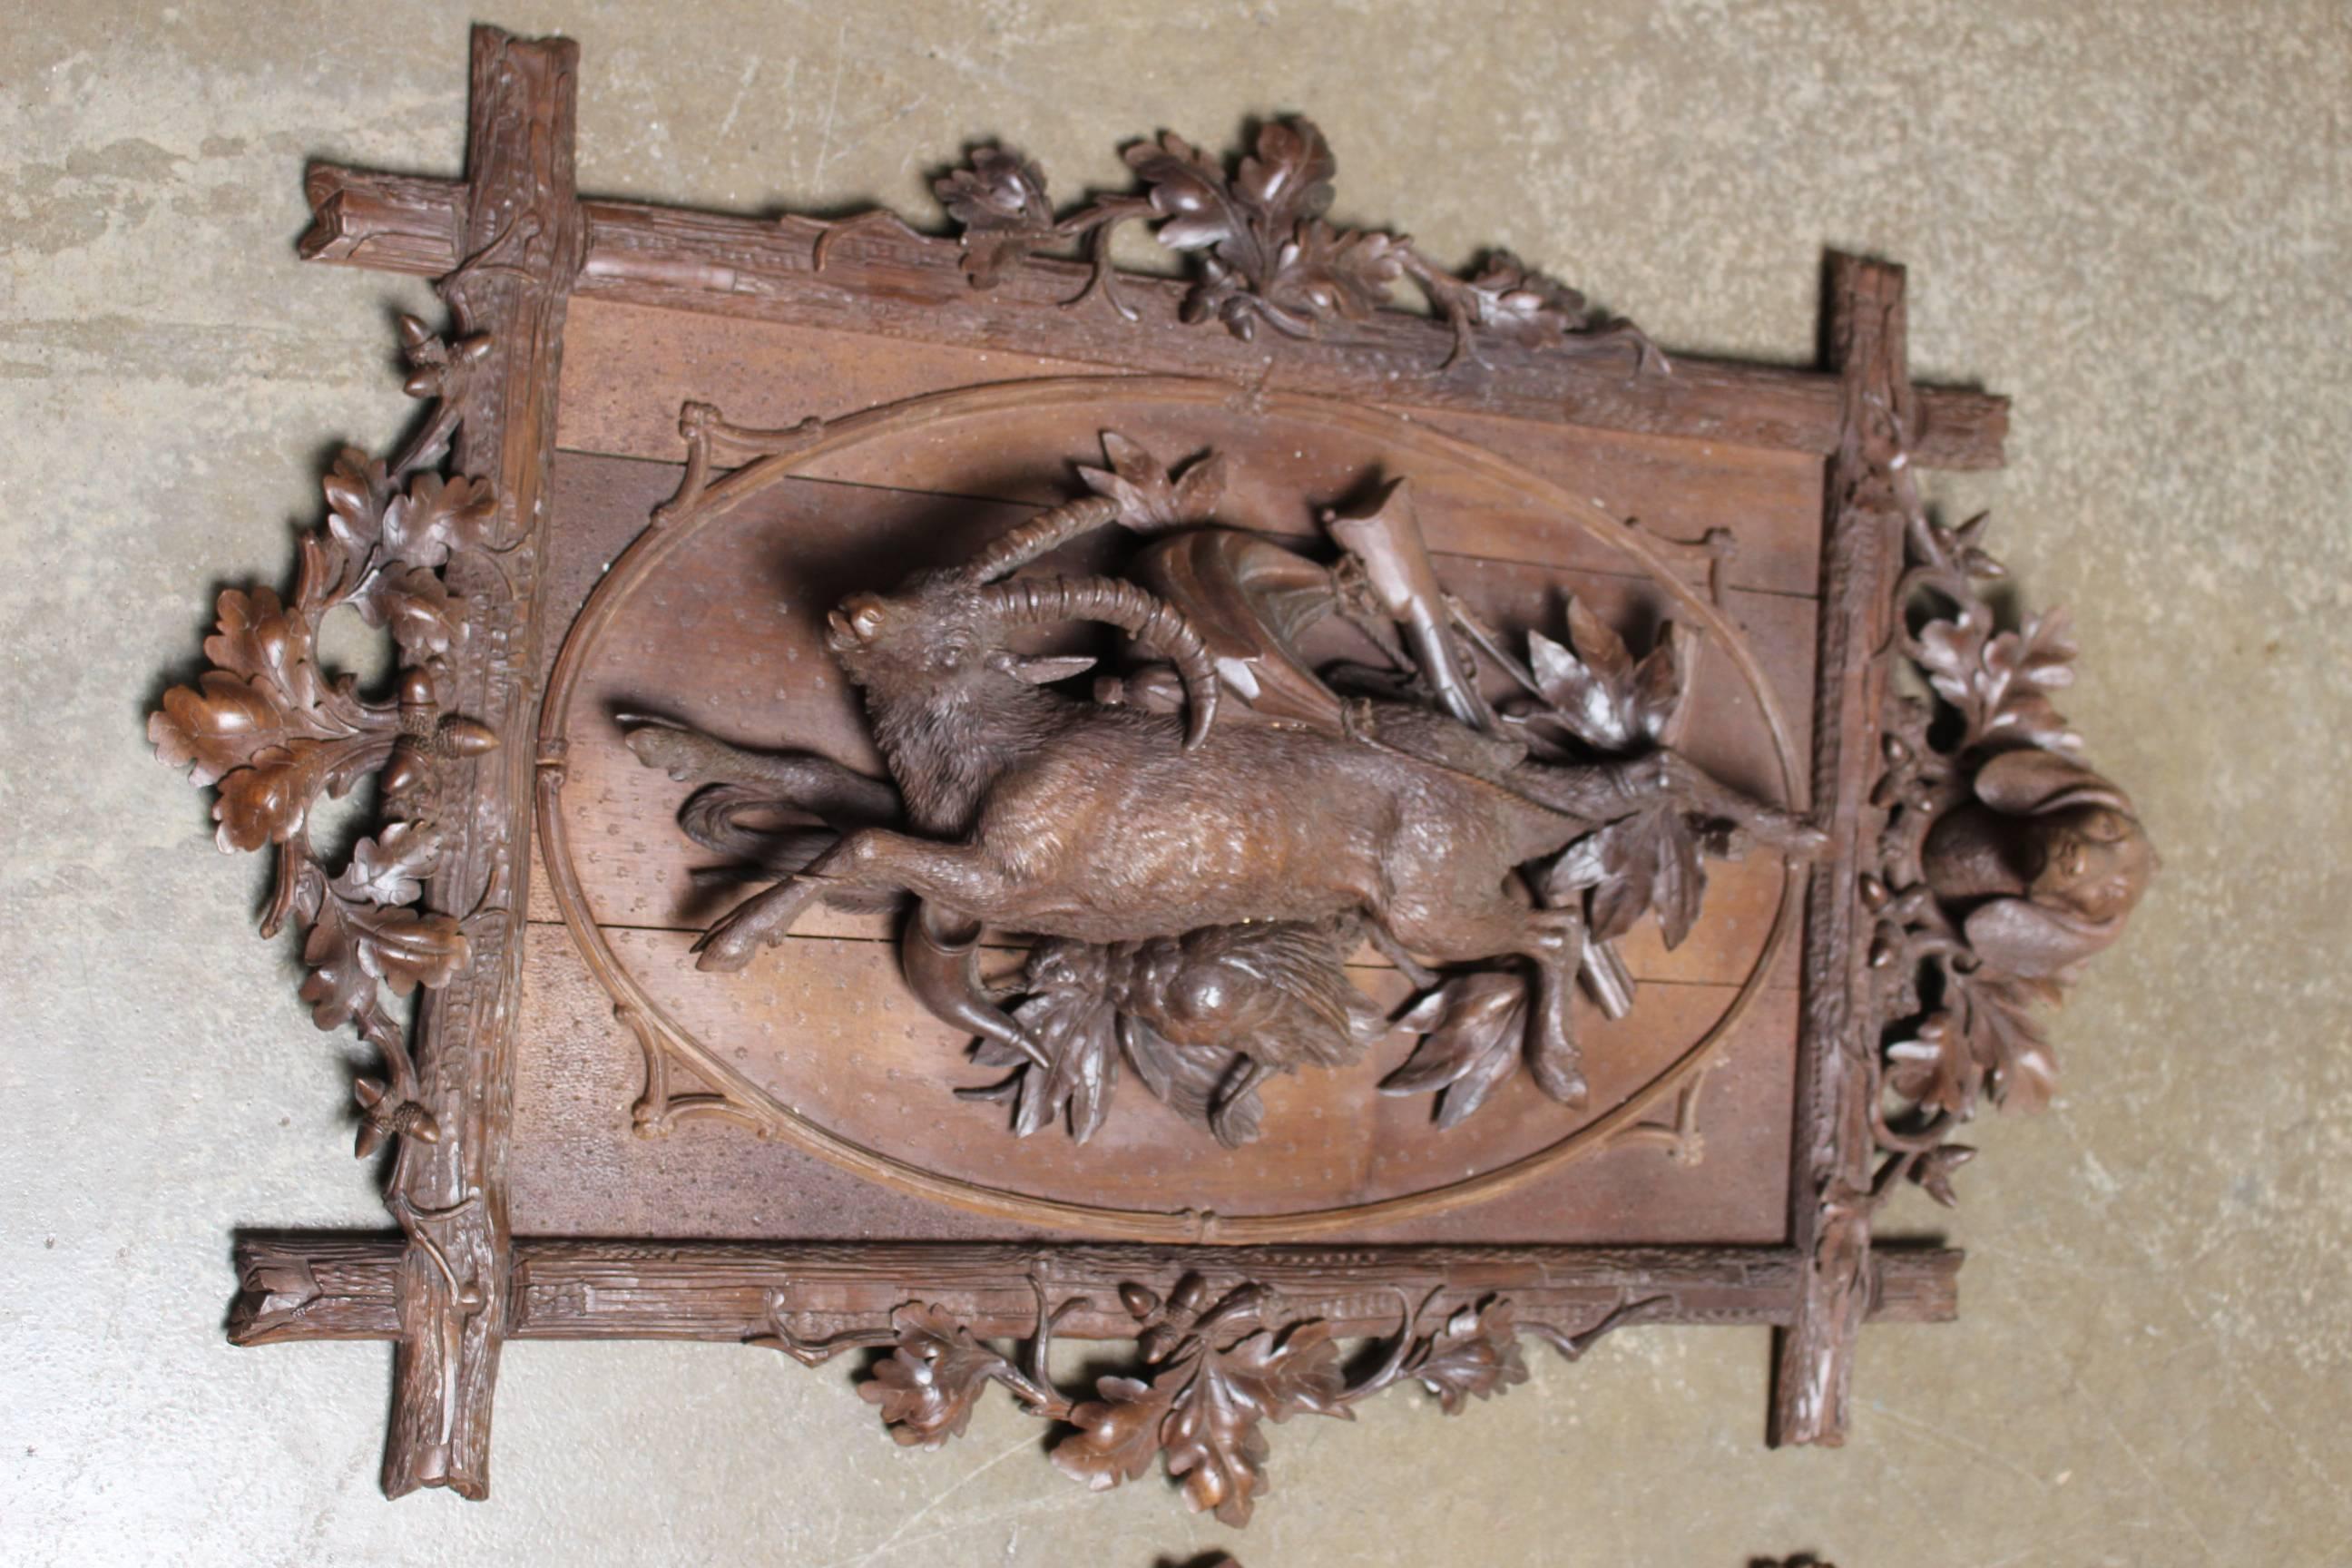 French pair of 19th century carved wood hunting panels in the style of Black Forest. These are beautifully carved with both panels depicting animals, hunting hounds foliage and acorns.